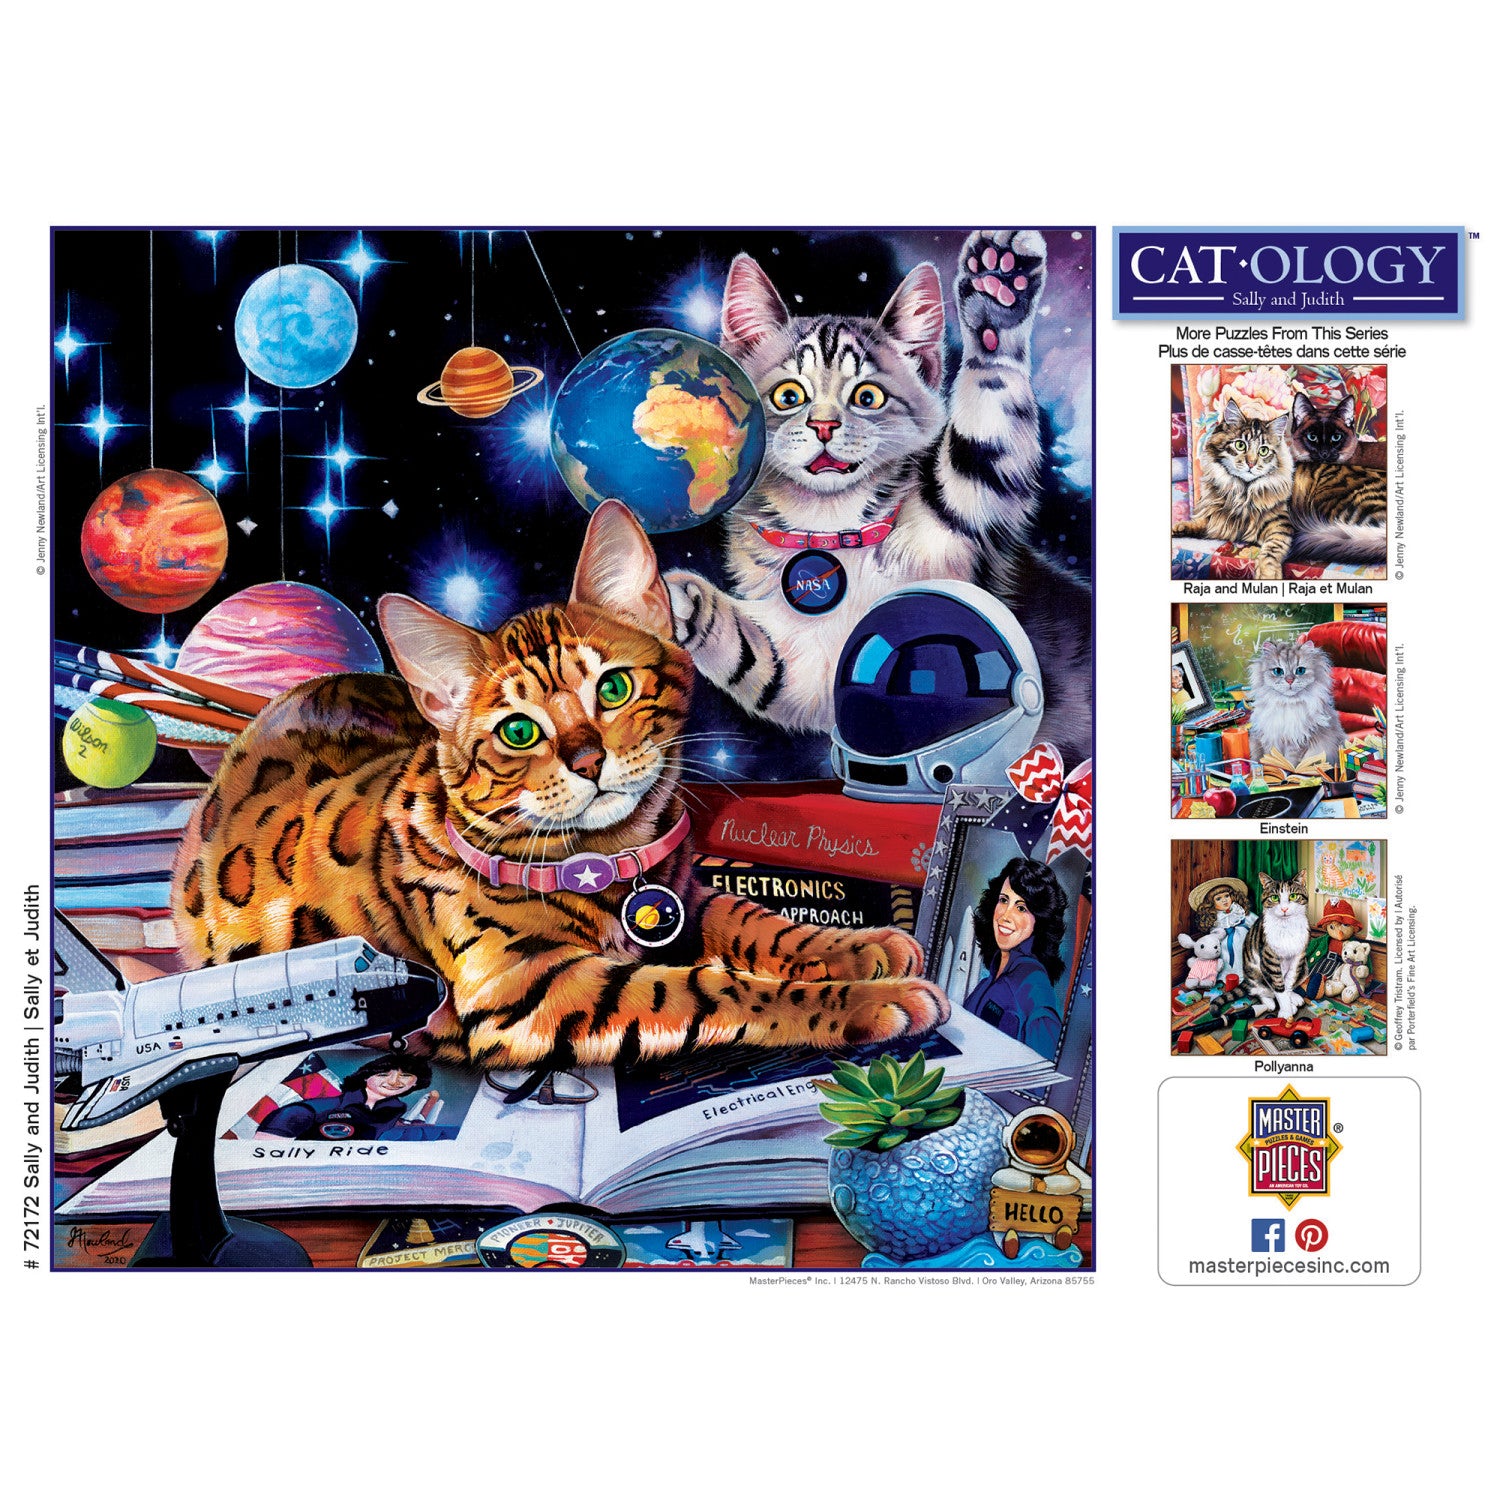 Catology - Sally and Judith 1000 Piece Puzzle